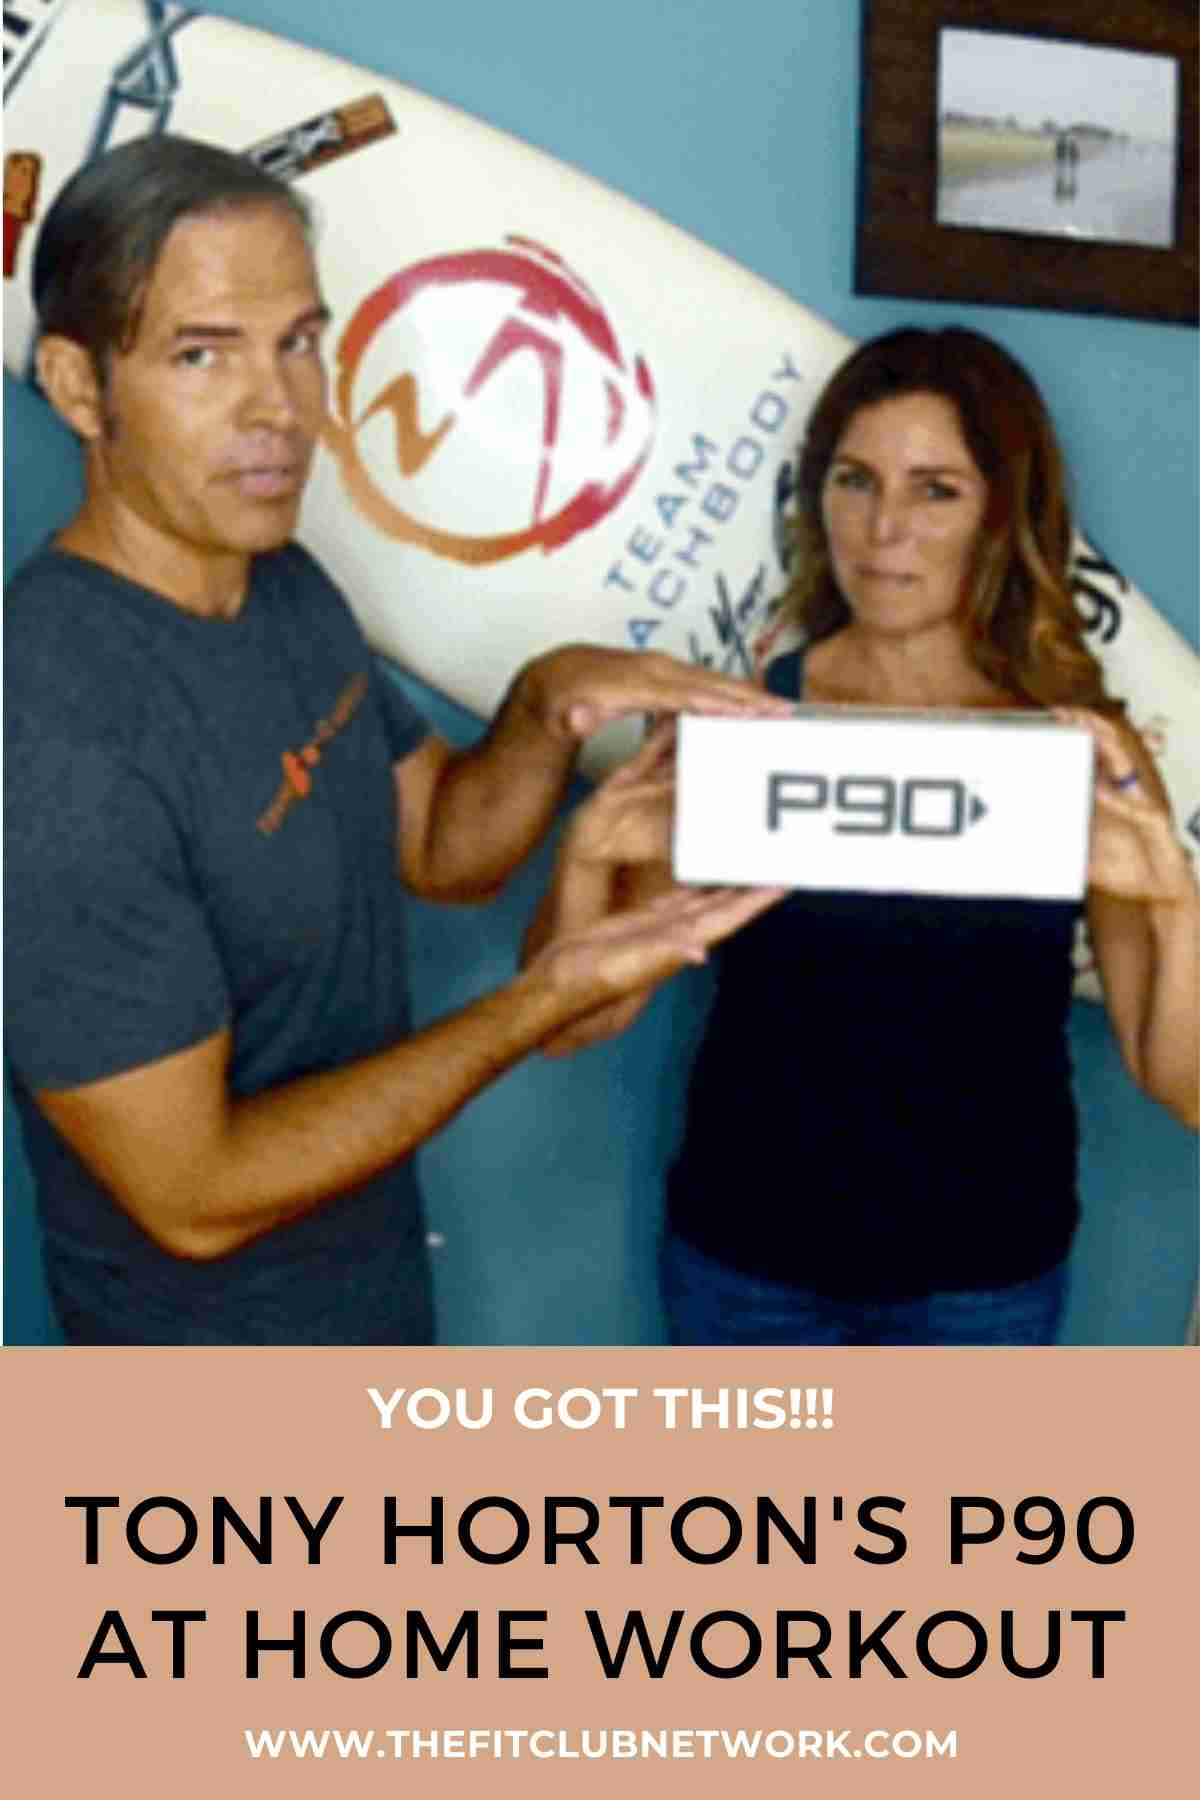 P90 Reviews and Unboxing | TheFitClubNetwork.com